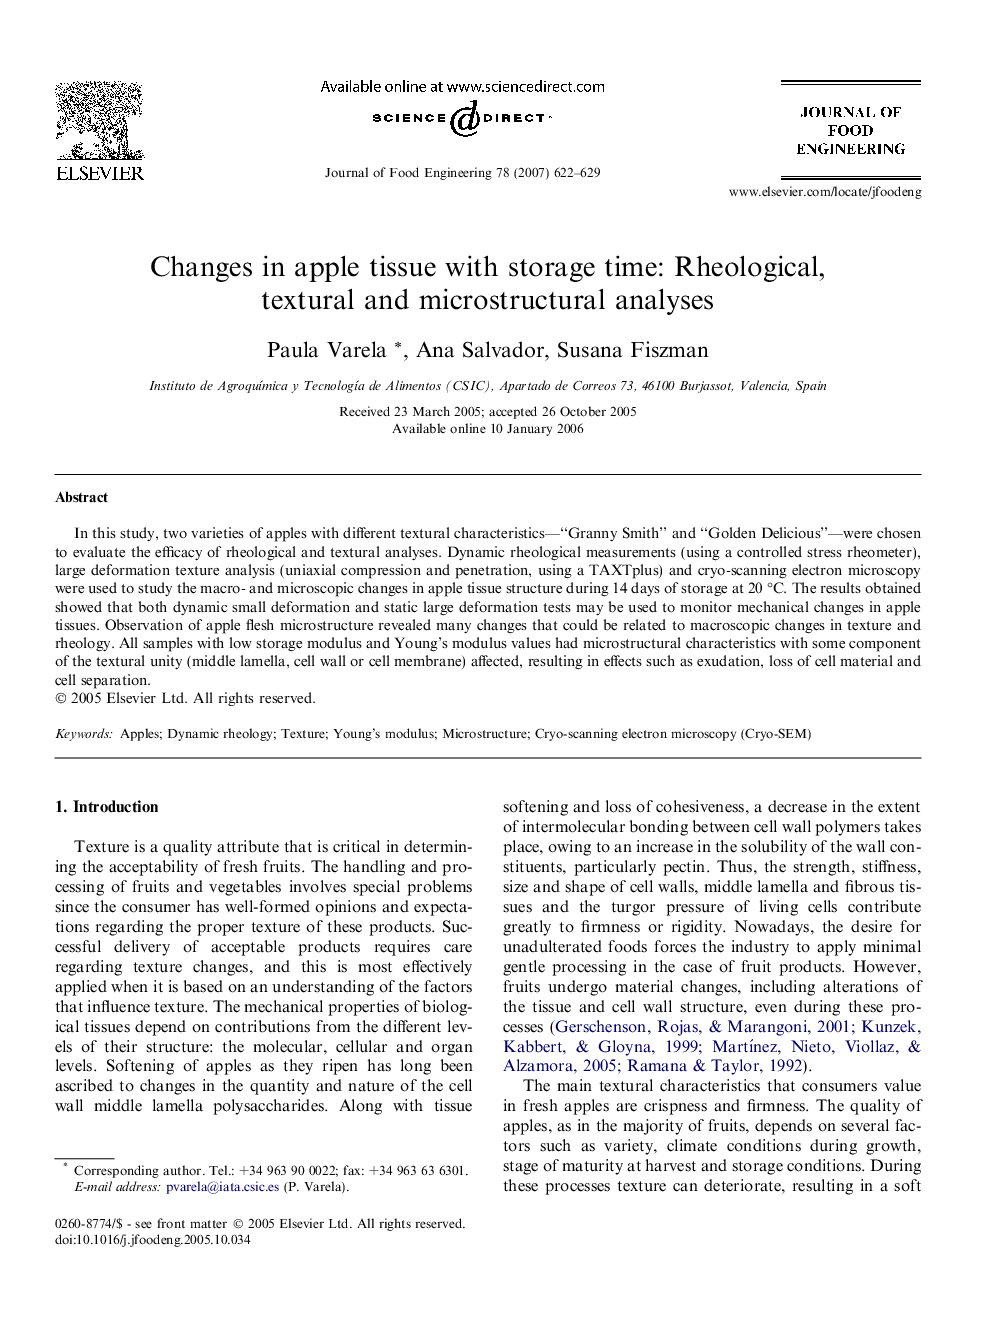 Changes in apple tissue with storage time: Rheological, textural and microstructural analyses